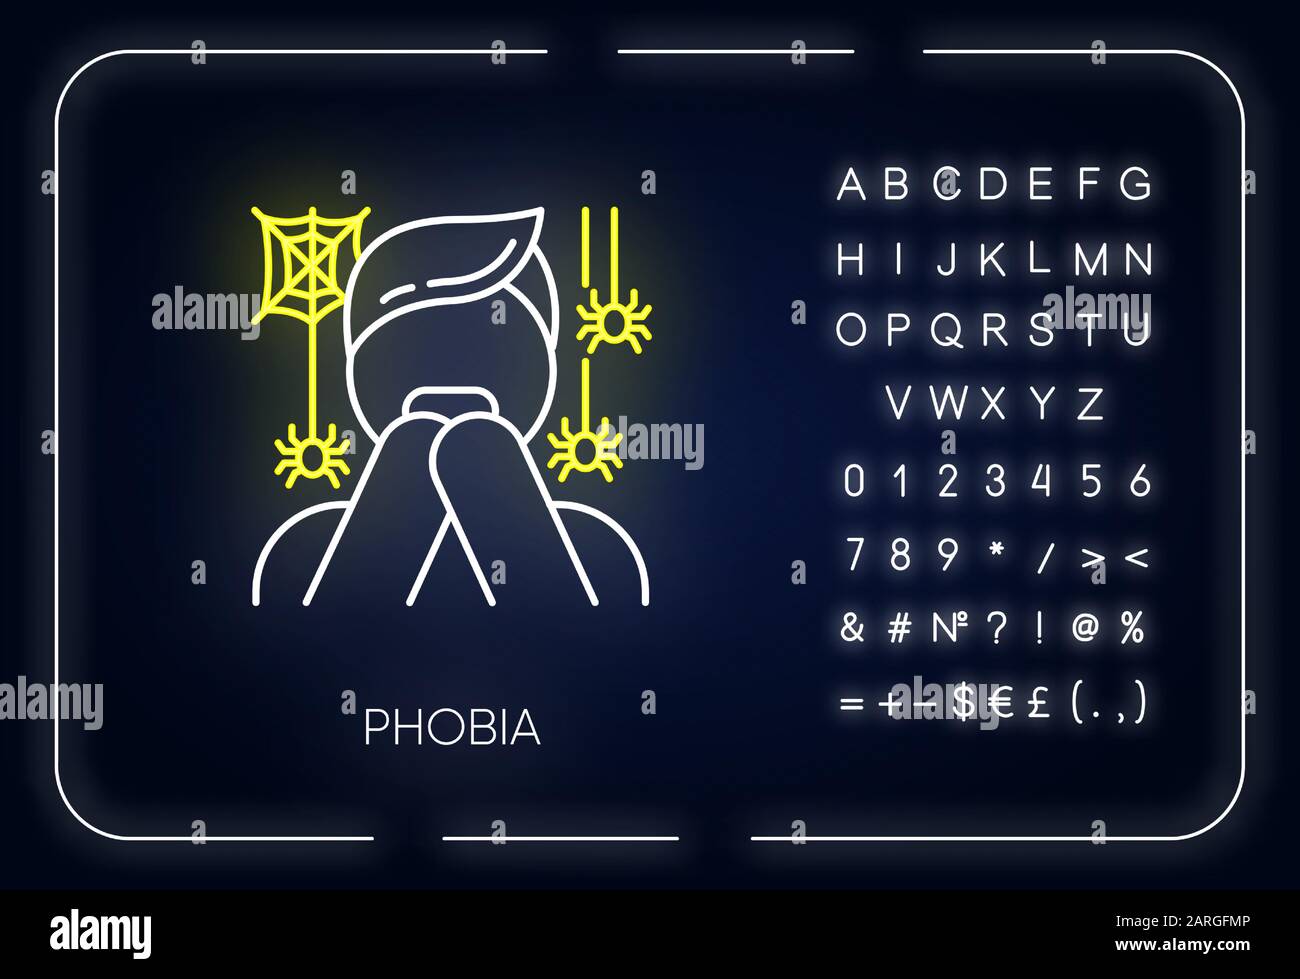 Phobia neon light icon. Fear of spiders. Arachnophobia. Frightened, terrified man. Horror. Panic attack. Mental disorder. Glowing sign with alphabet, Stock Vector